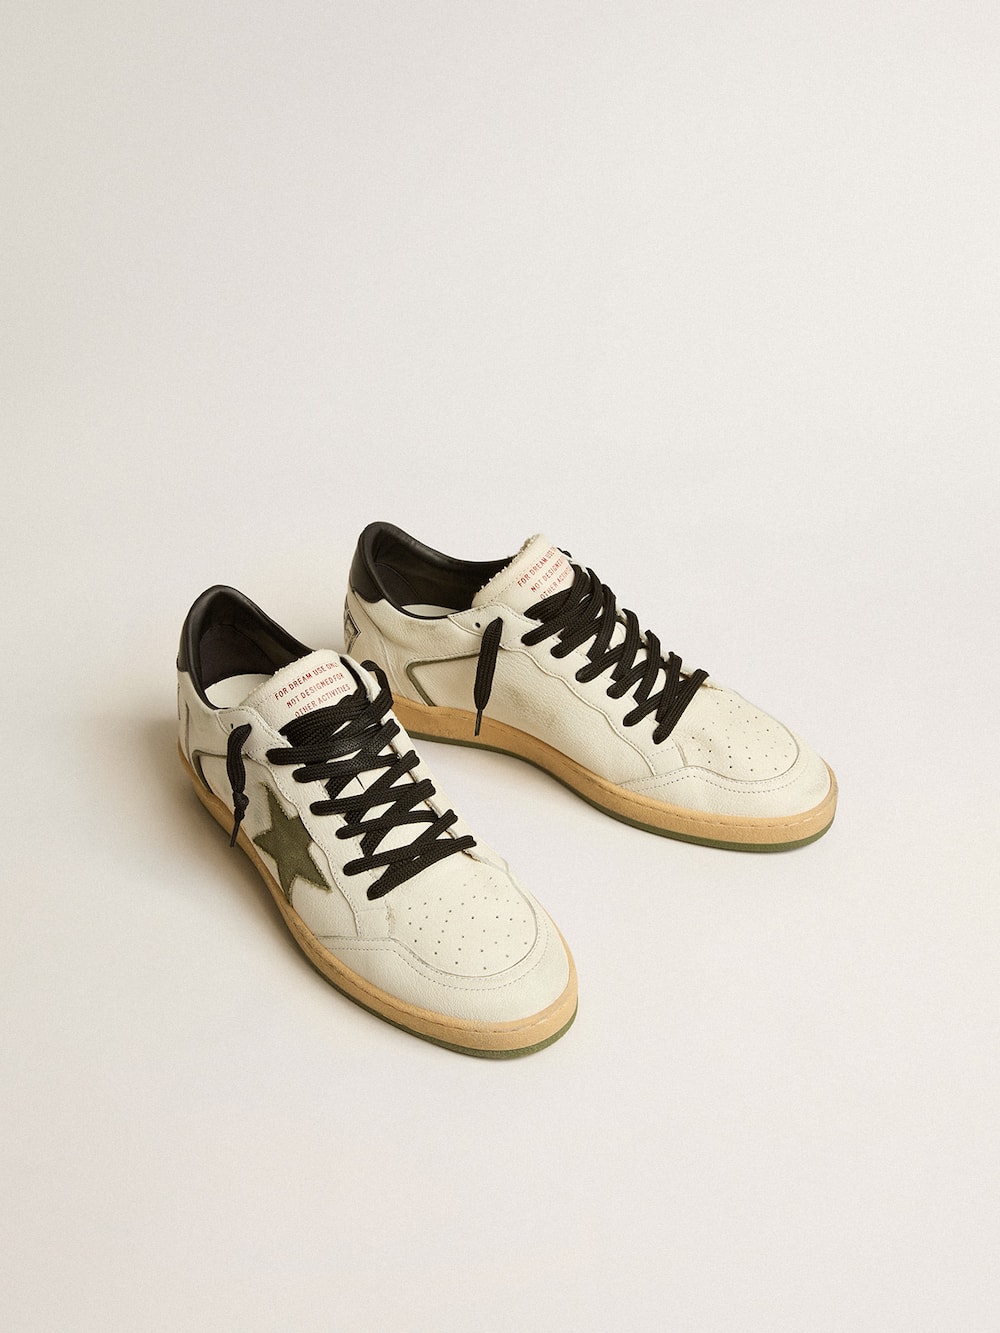 Golden Goose - Men's Ball Star LTD in nappa leather with canvas star and black leather heel tab in 